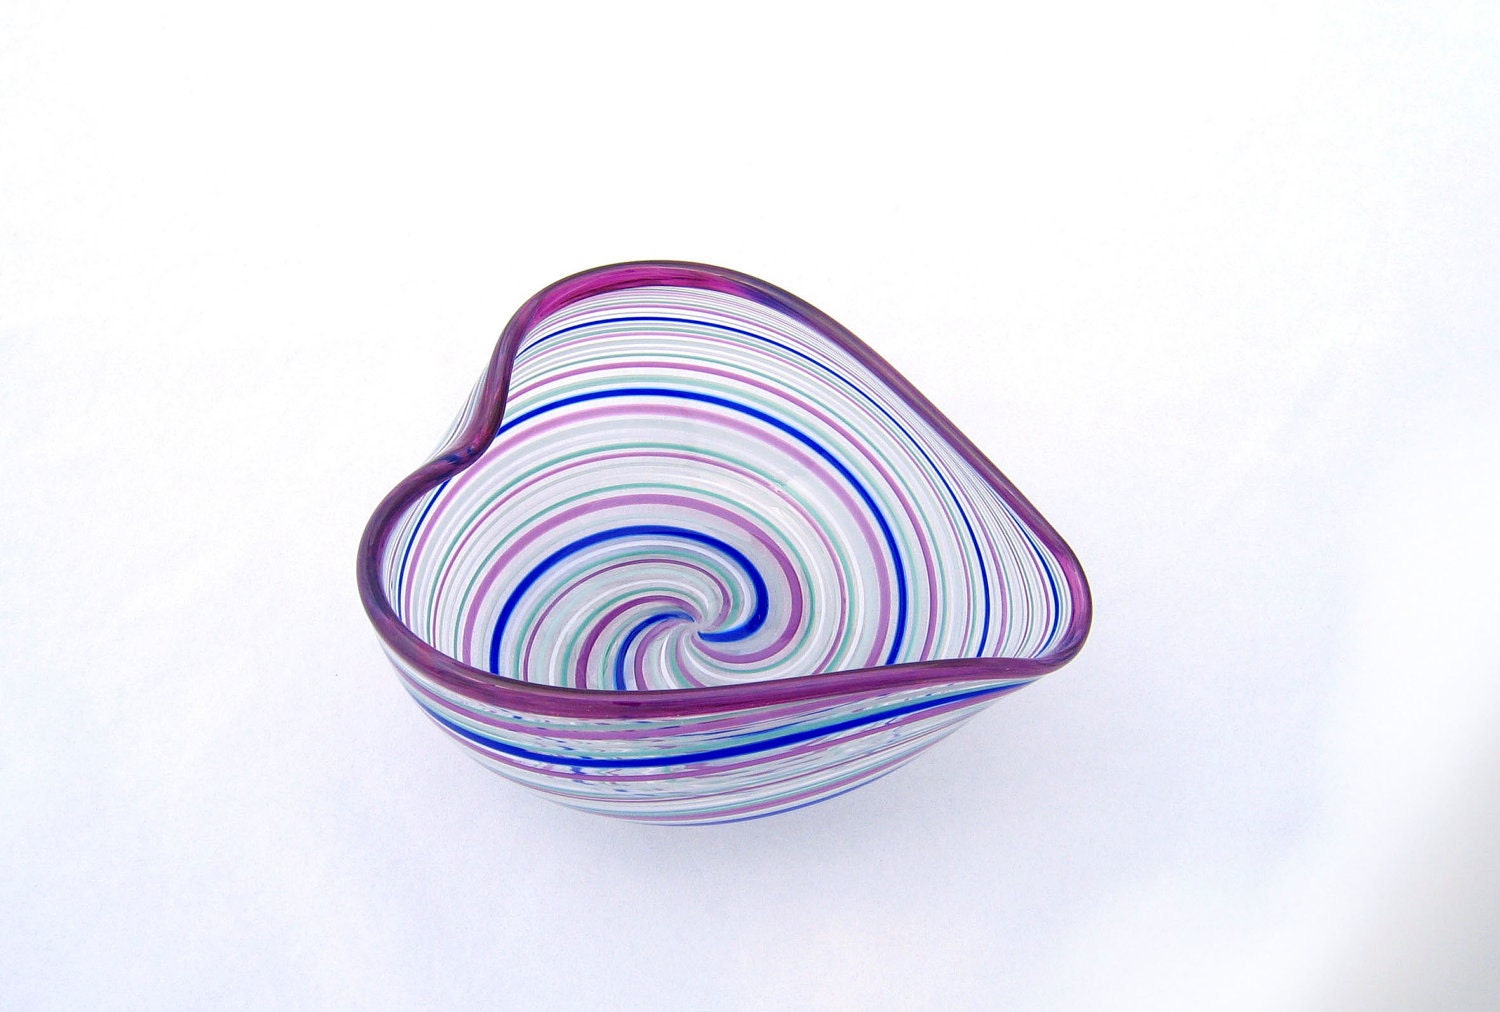 Glass Heart Bowl - Venetian Style Purple Multi Color Mod Modern Mother's Day Gift Wedding Gift dtteam teamcamelot tagt